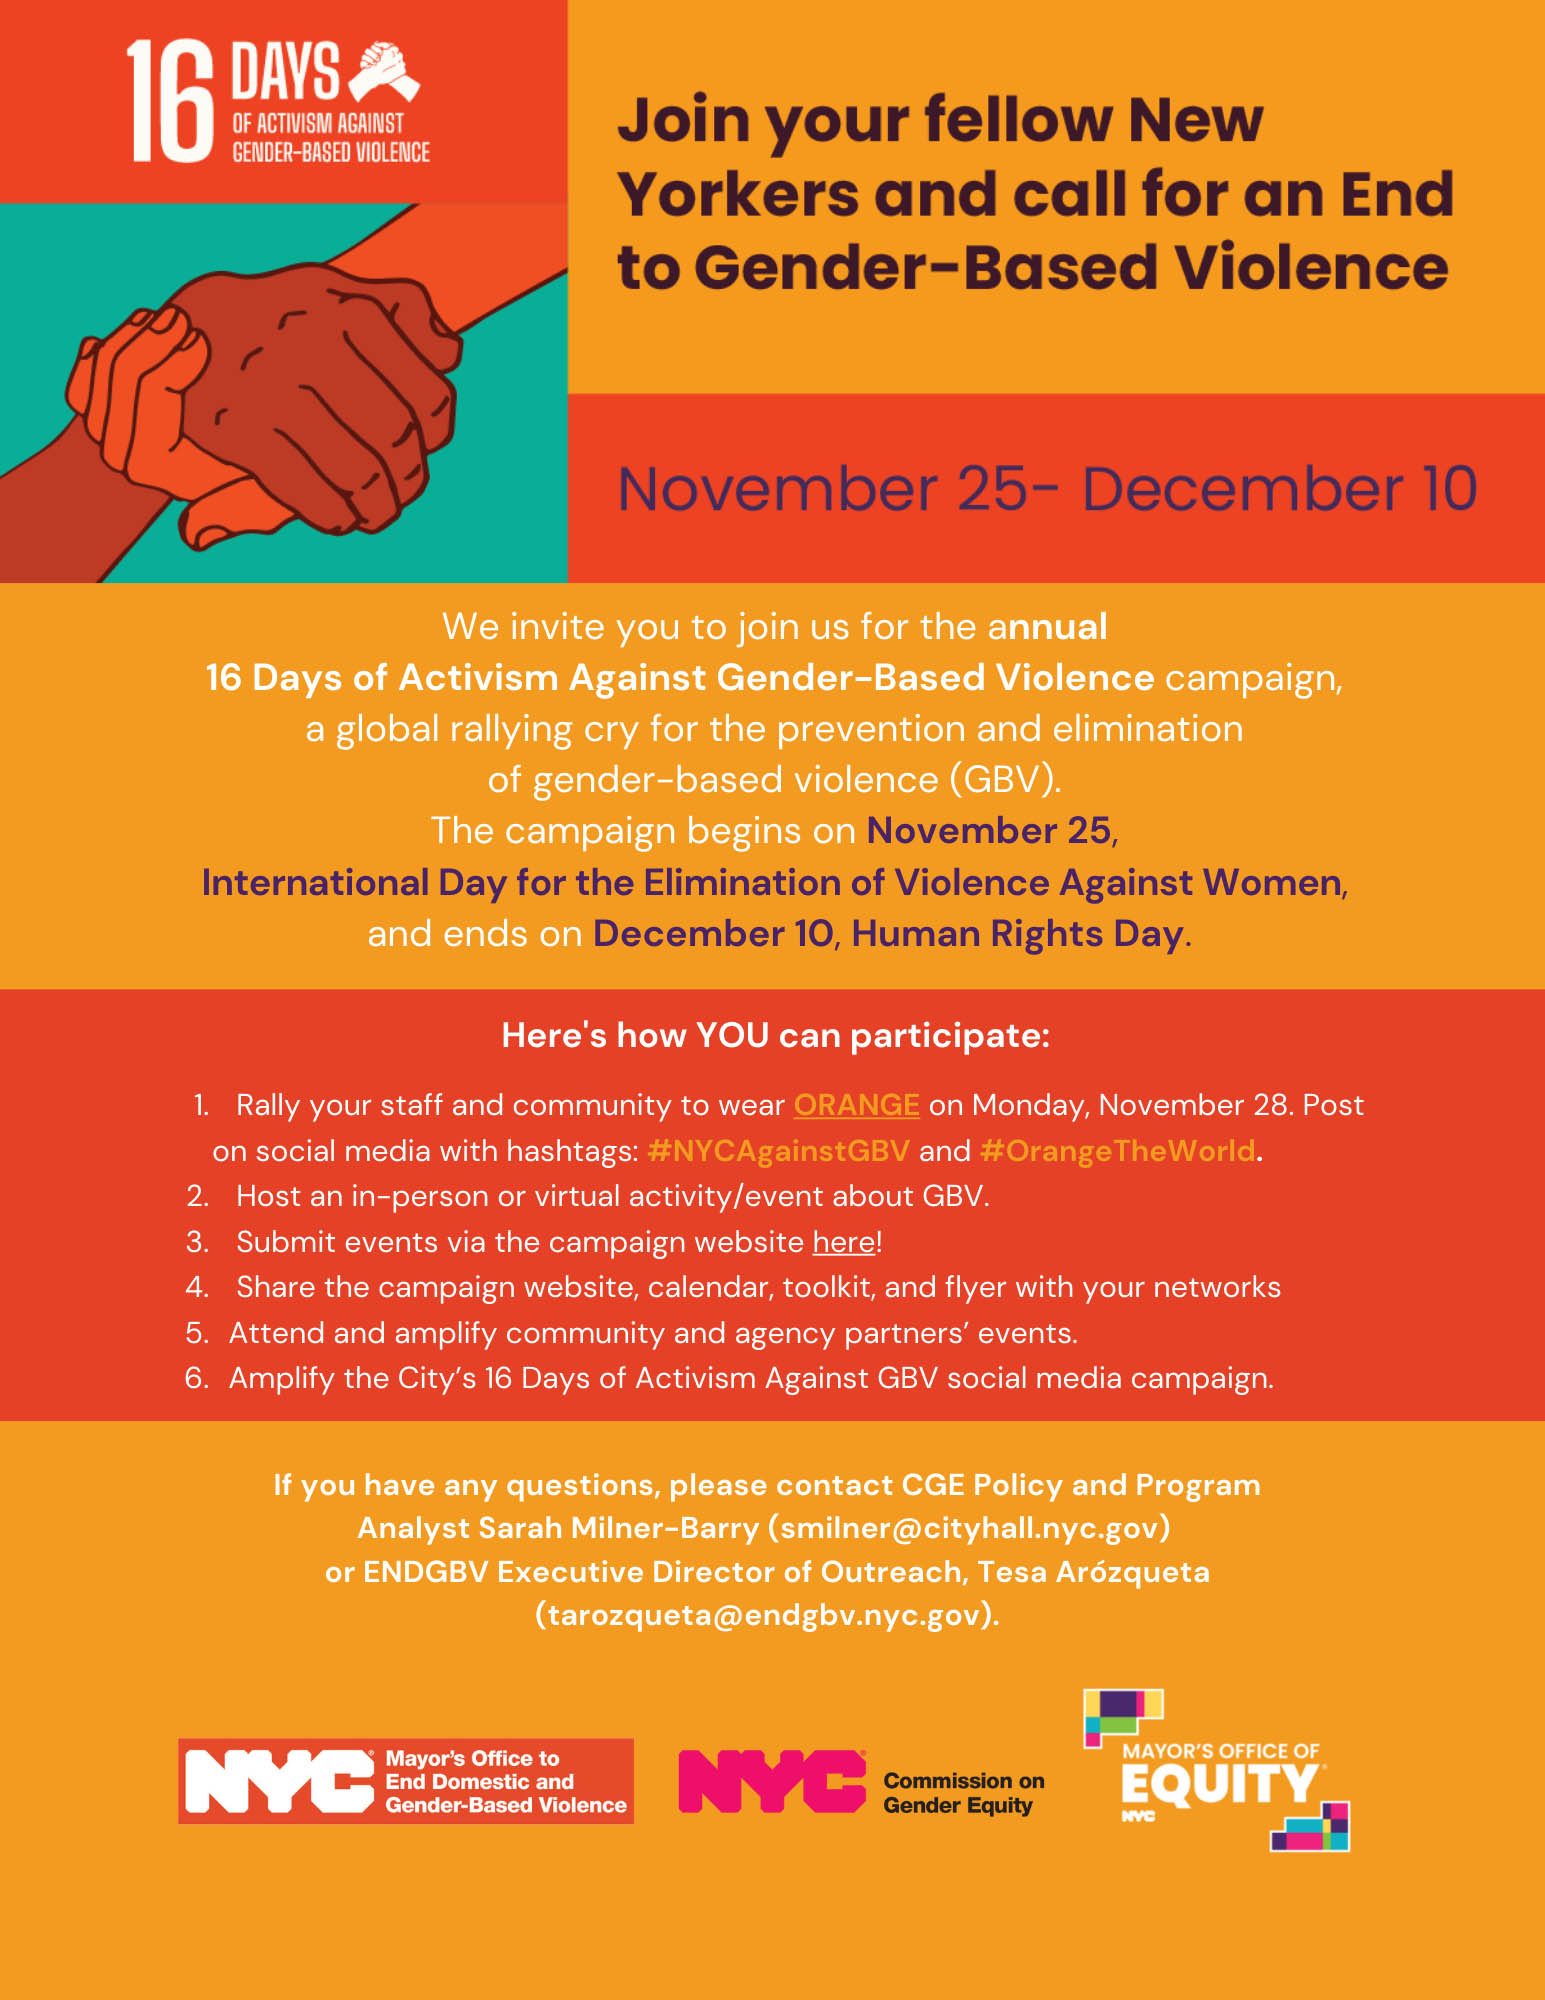 Tri-color square background with graphic logo holding hands. White text, states “16 Days of Activism Against GBV.” Black text: Join your fellow New Yorkers and call for an End to GBV and itemized list of how to participate